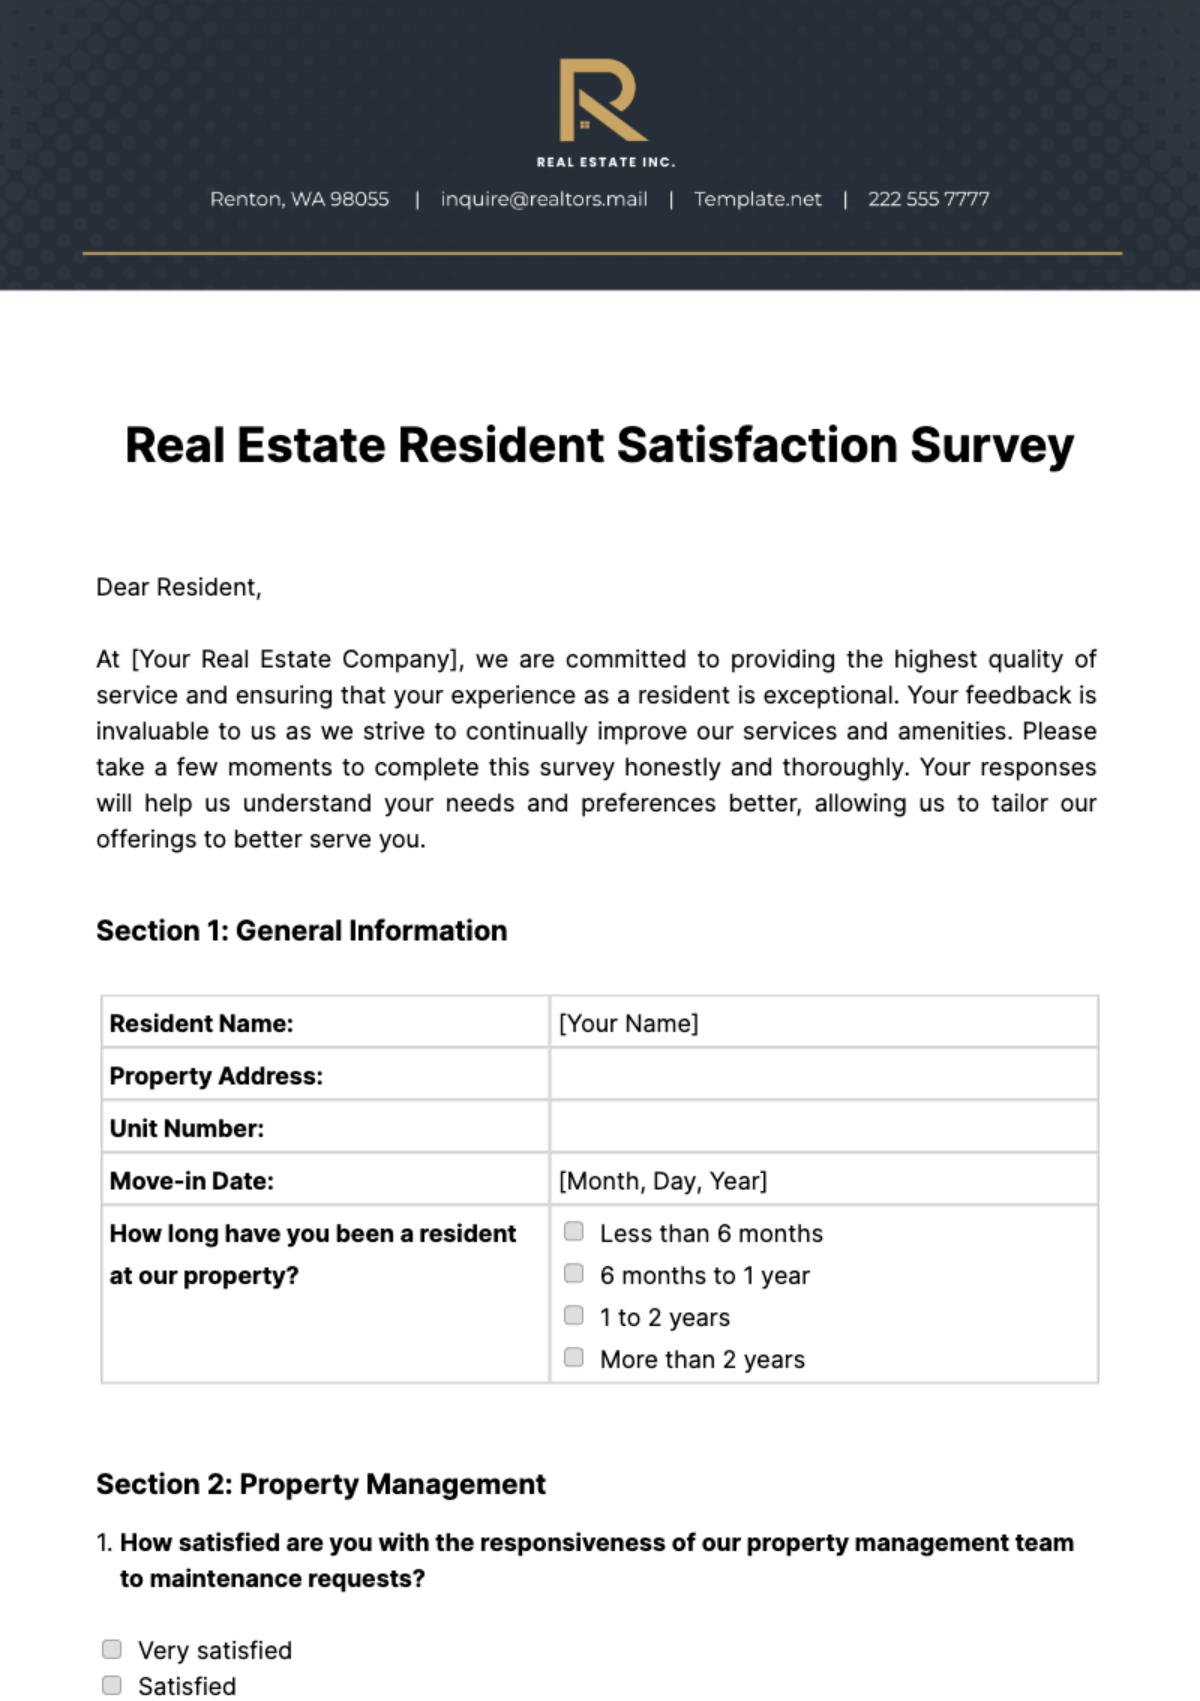 Real Estate Resident Satisfaction Survey Template